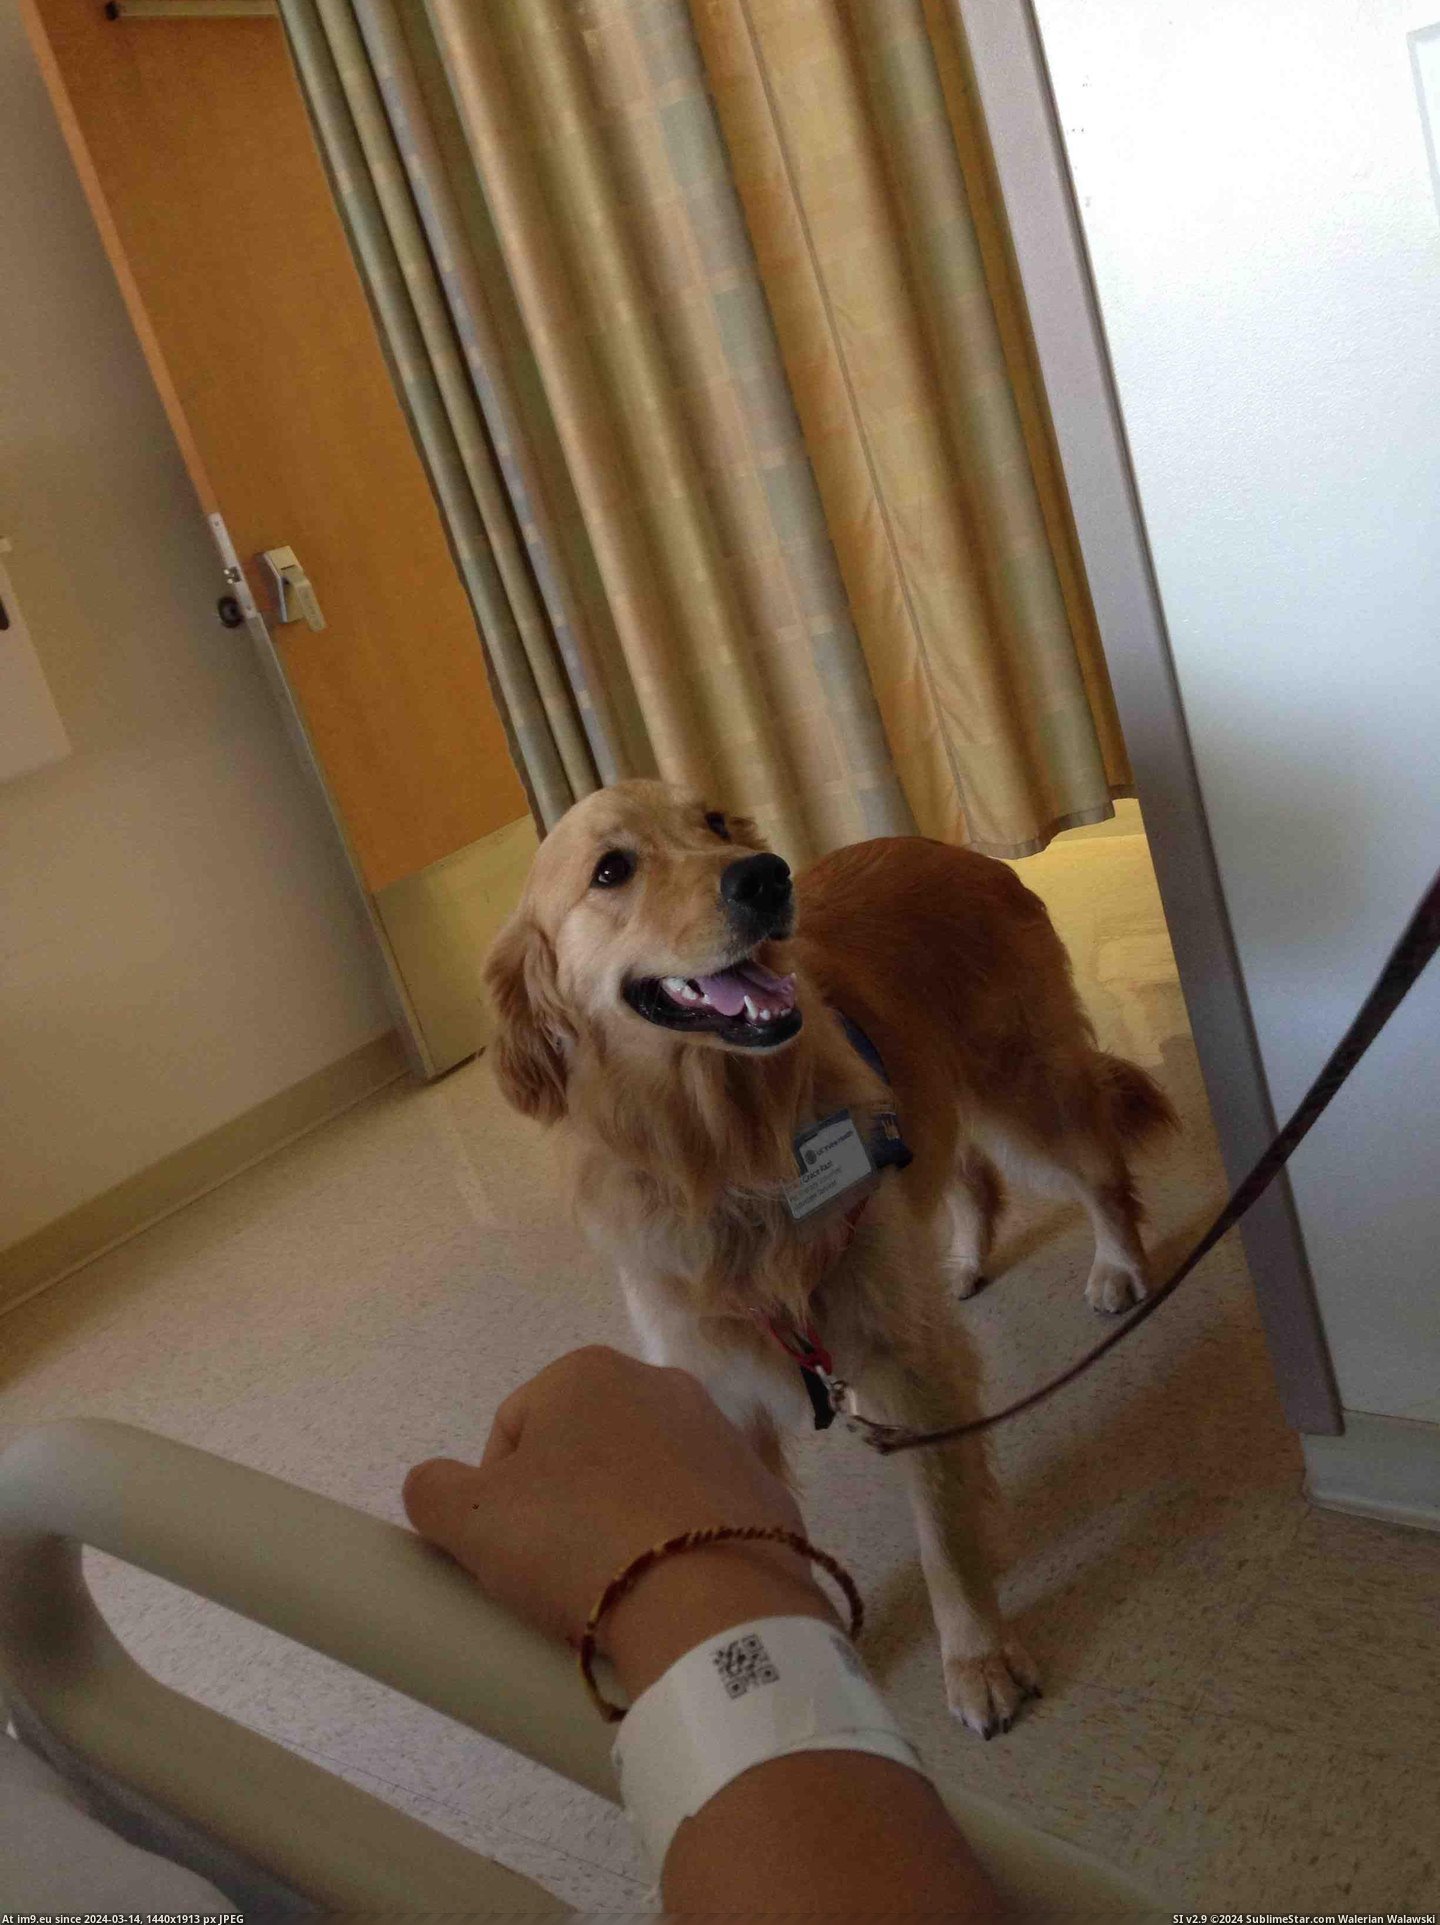 #Day #Bed #Dog #Molly #Therapy #Stay #Rest #Hospital [Aww] going on day four of bed rest in a hospital. Molly the therapy dog made my stay so much better! Pic. (Bild von album My r/AWW favs))